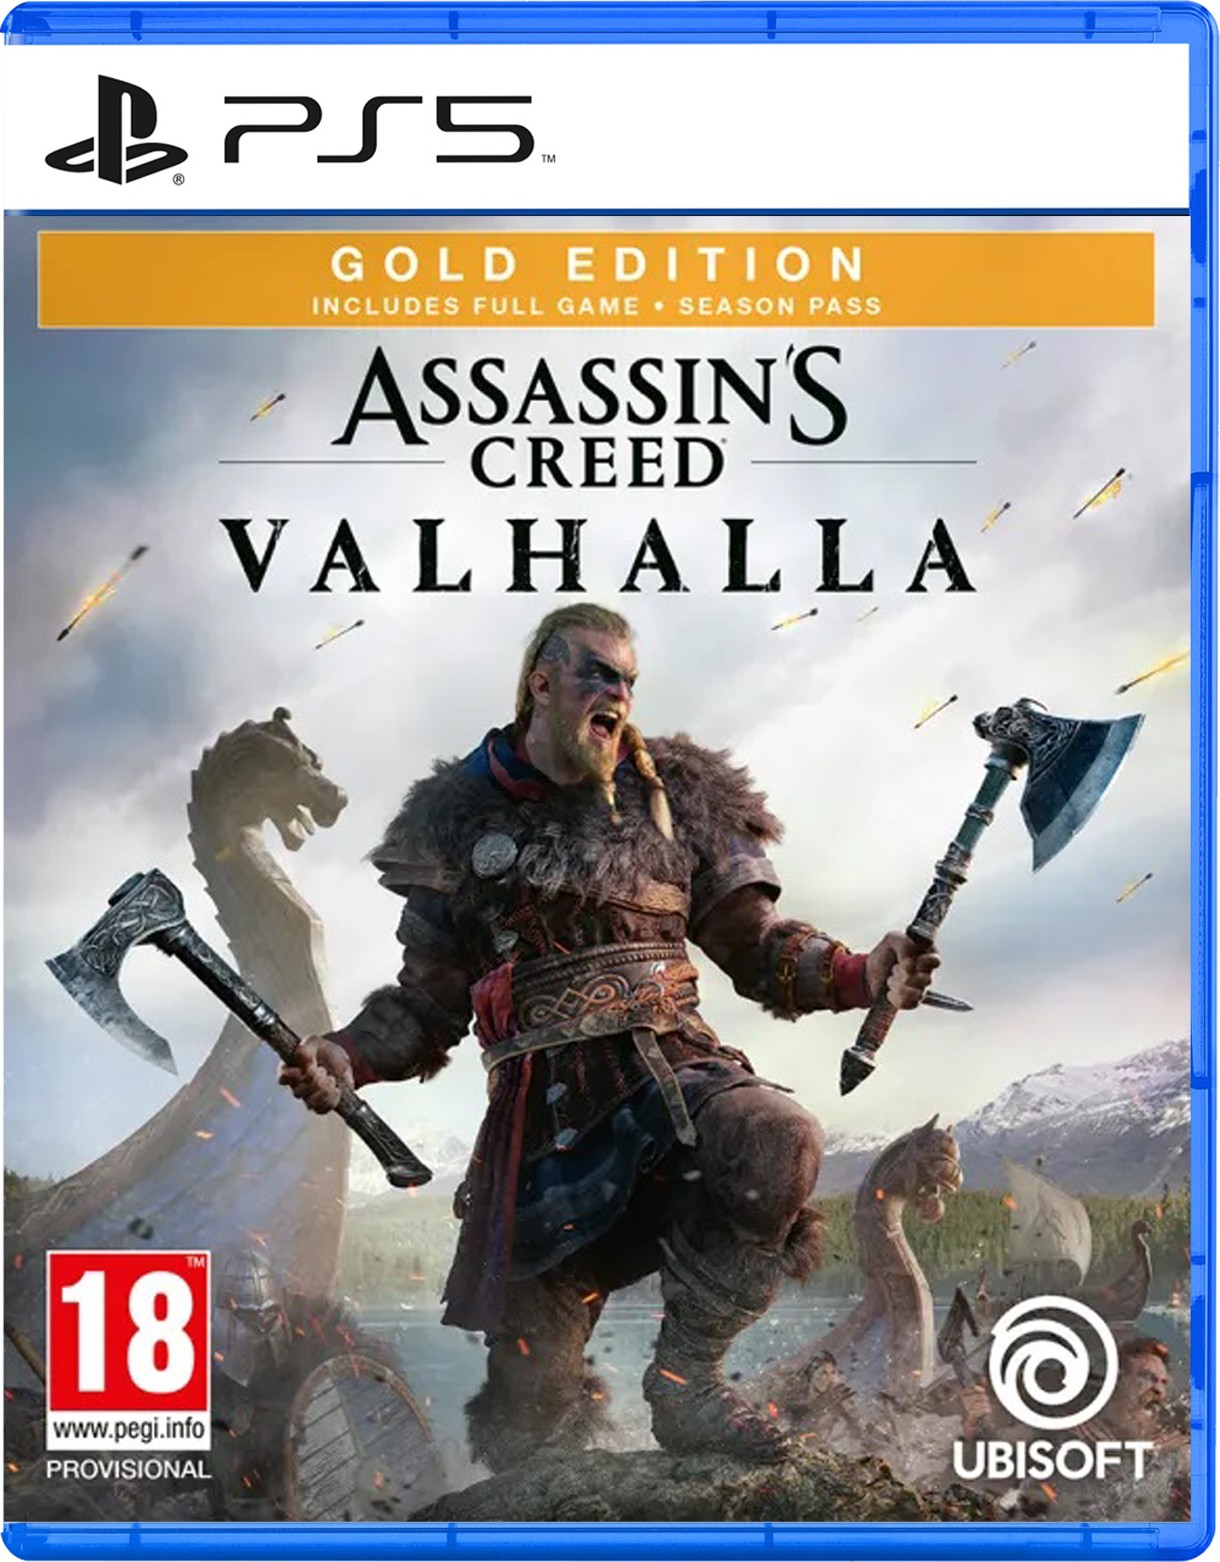 Assassin's Creed Valhalla, Assassin's Creed, Ubisoft, PlayStation 5, PS5, release date, gameplay, features, price, Asia, trailer, Limited Edition, Gold Edition, Ultimate Edition, Multi-Language